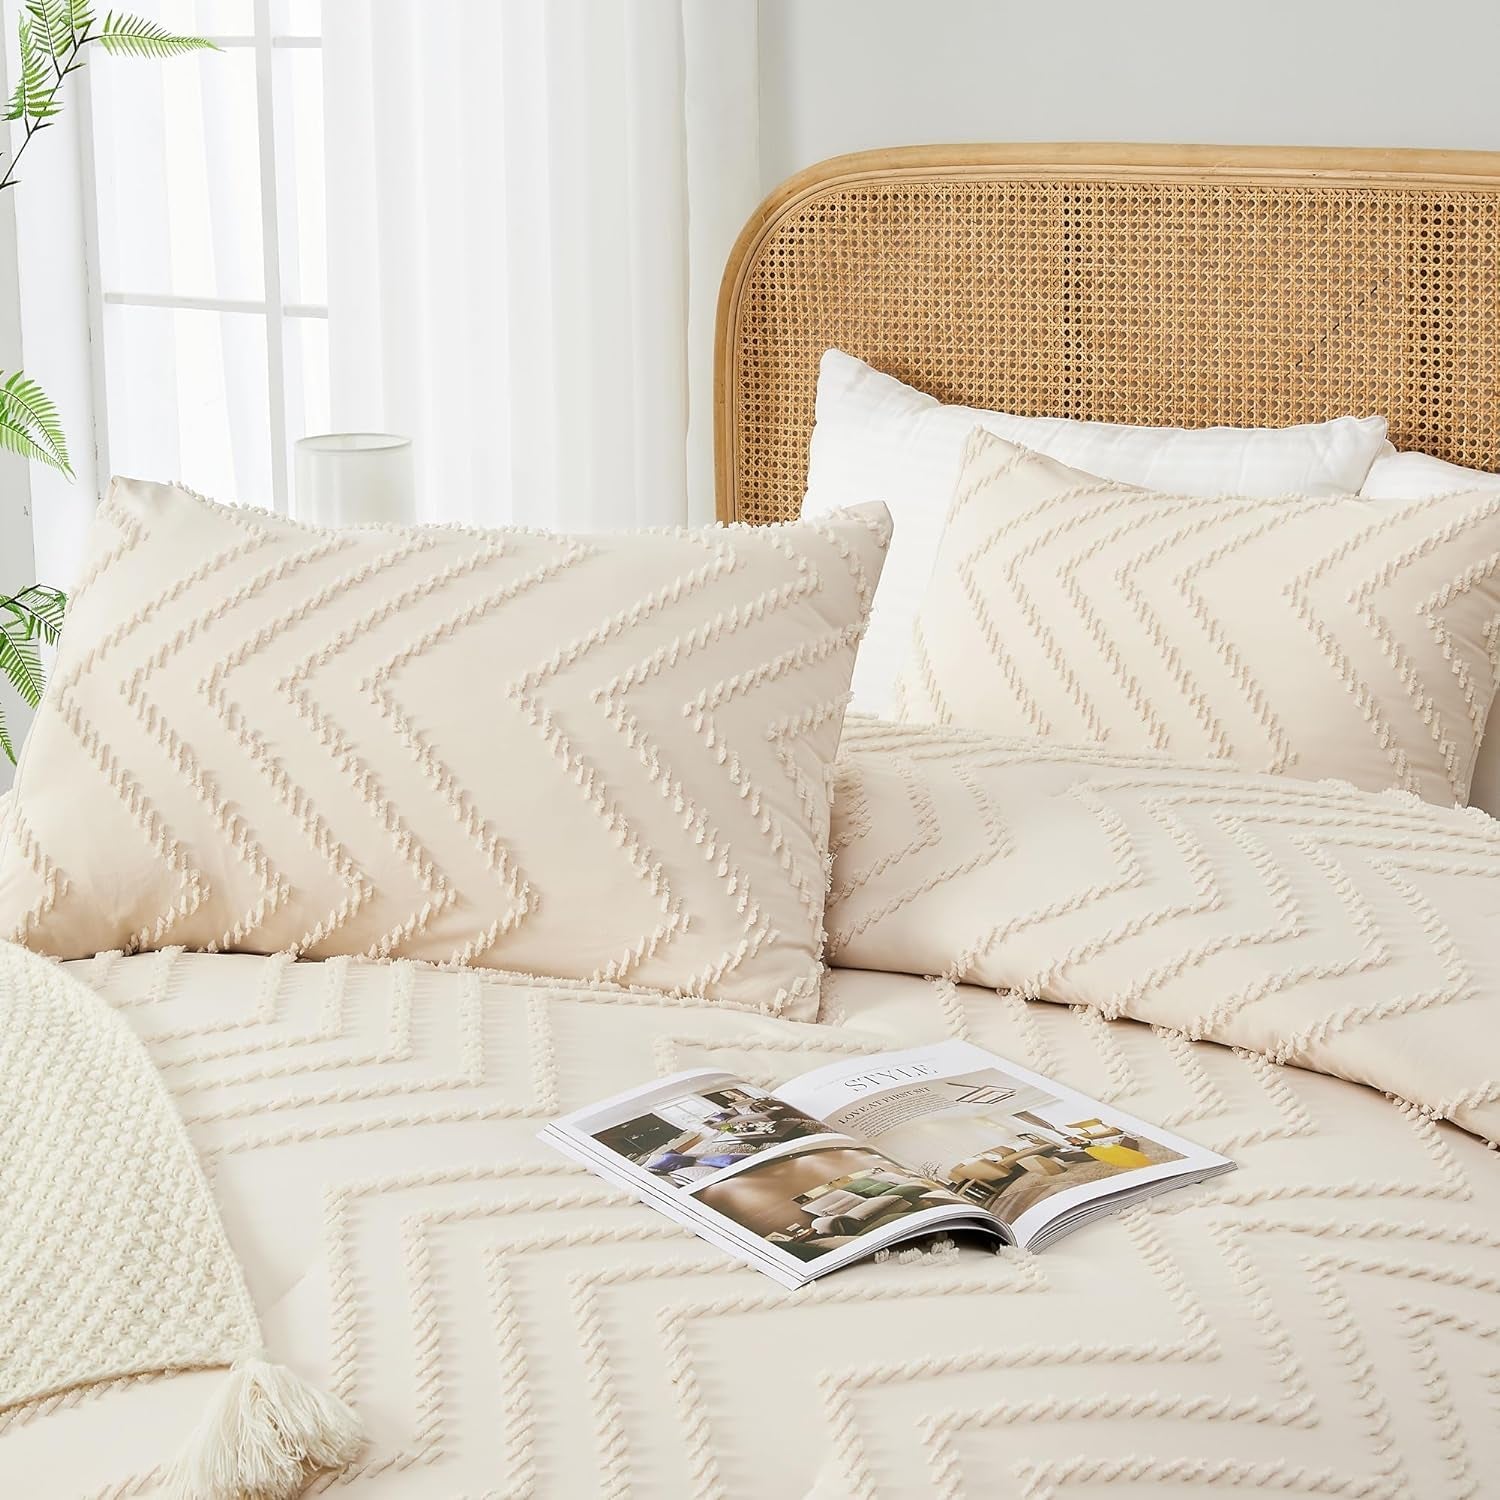 Full Size Comforter Sets, Beige Boho Cream Soft Warm Tufted Neutral Bedding Comforter Sets for Full Size Bed, 3 Pieces Aesthetic Chevron Farmhouse Cute Bohemian Textured Bedding Set